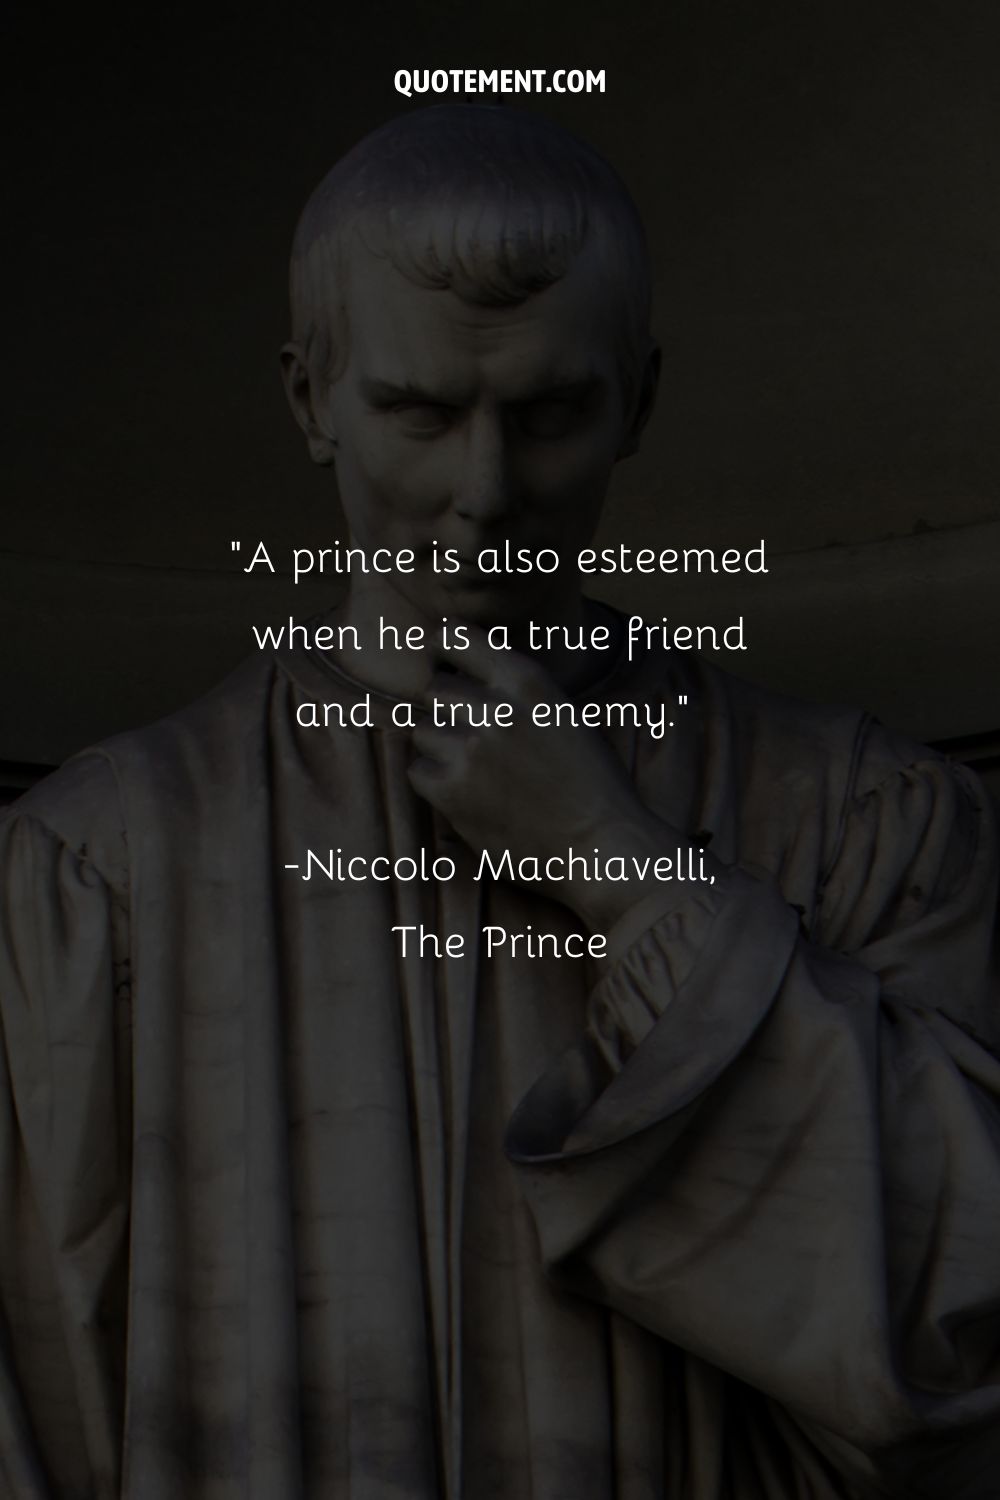 A prince is also esteemed when he is a true friend and a true enemy